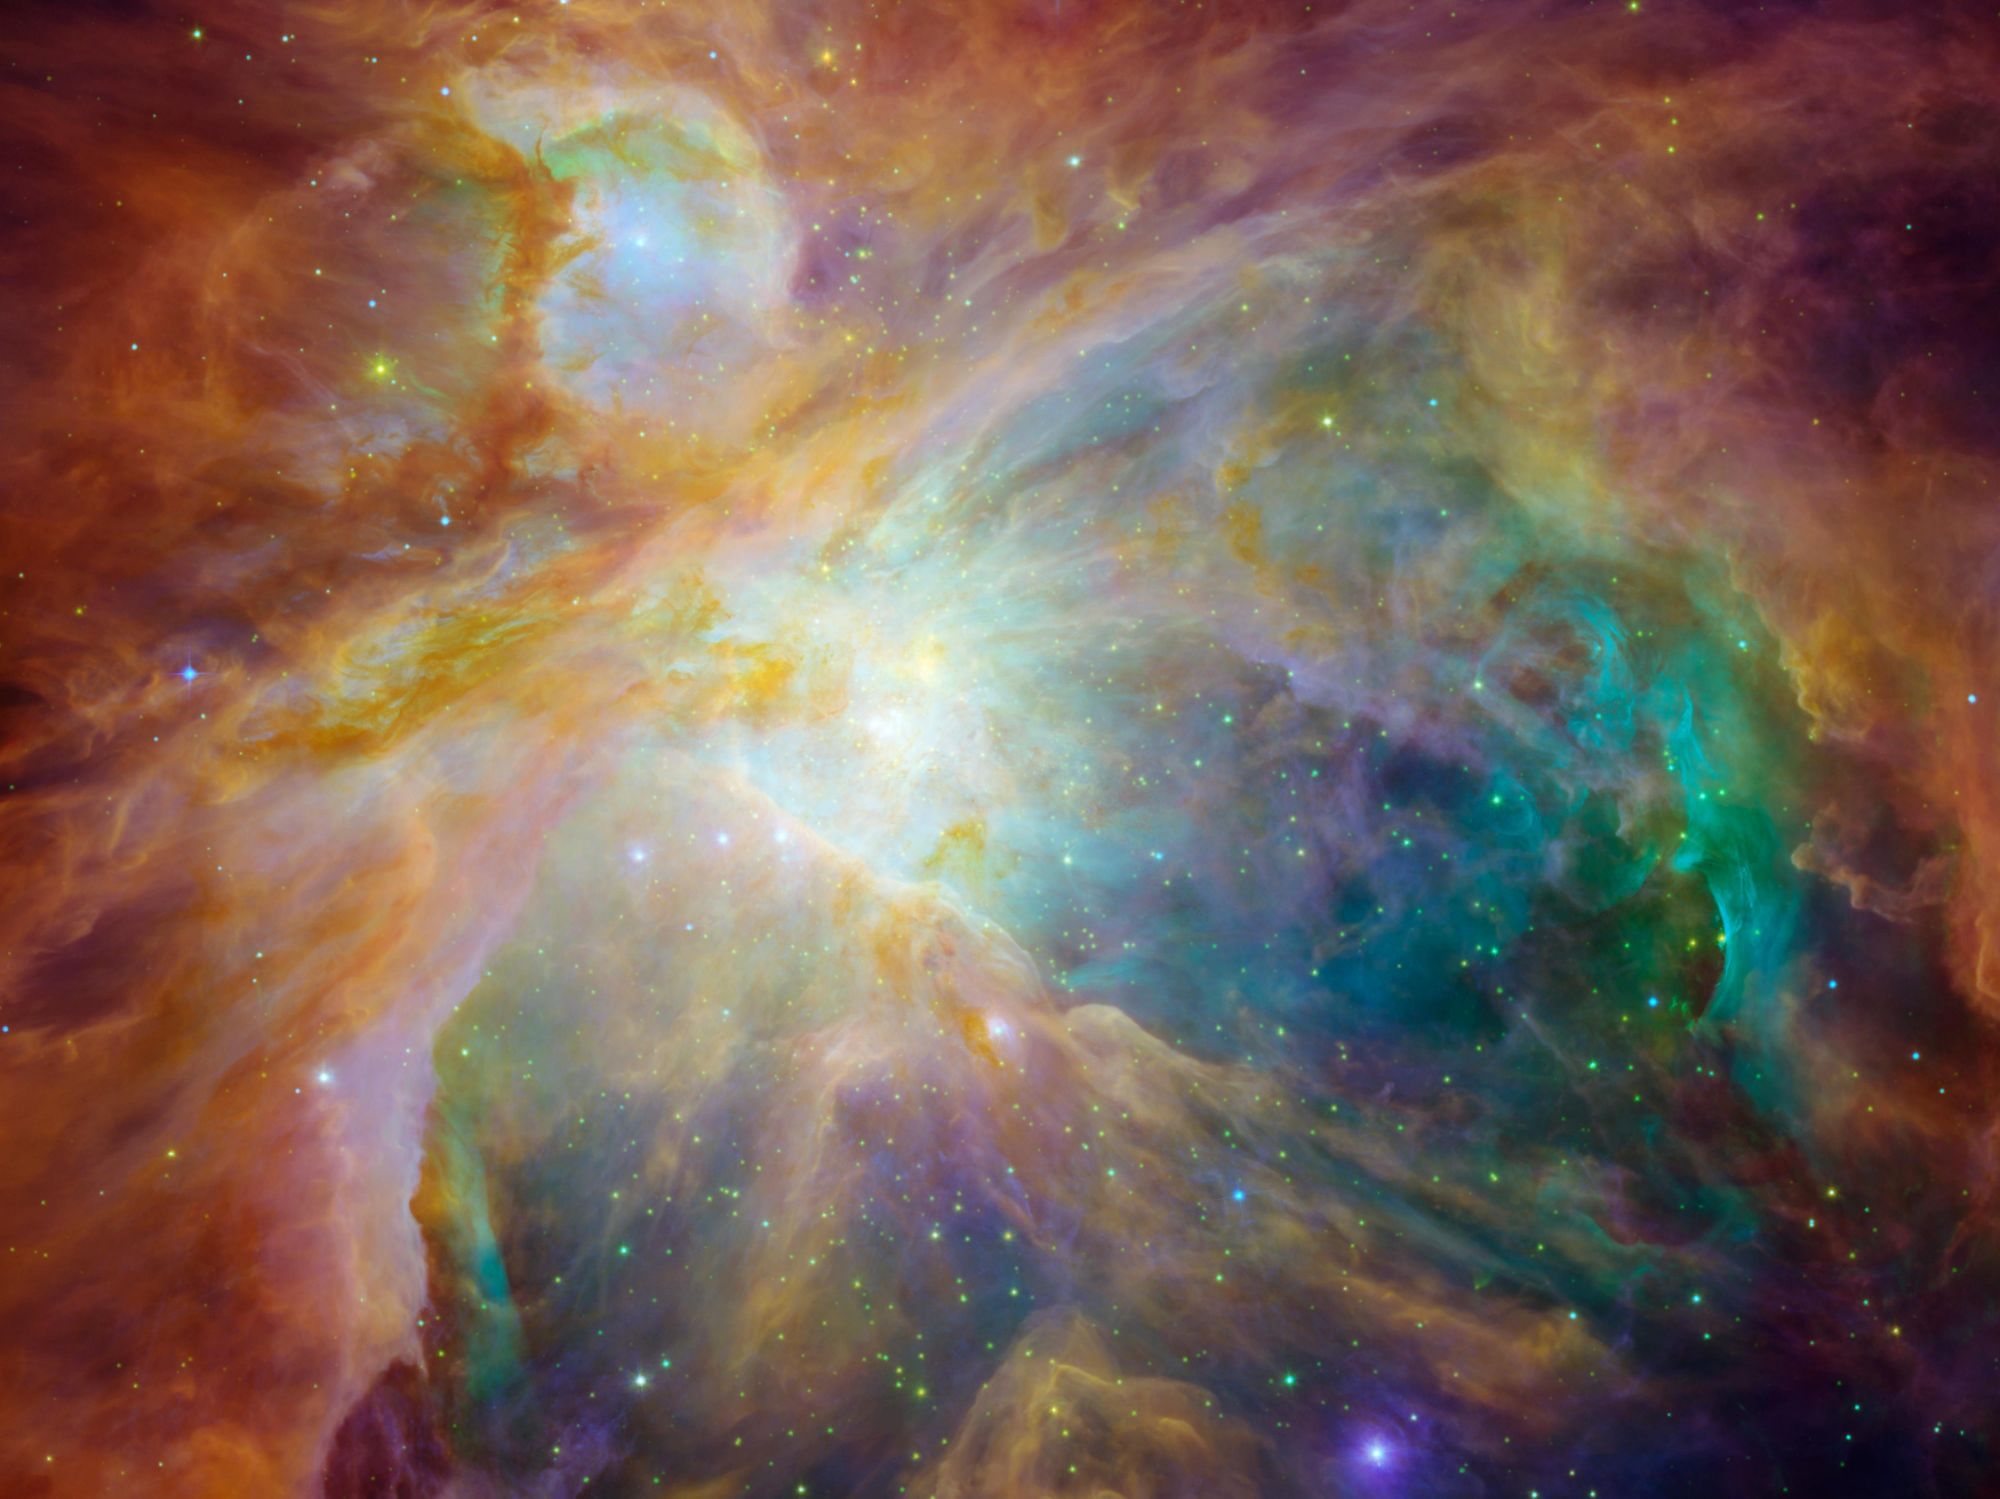 NASA shared some interstellar fireworks to end 2020. The Orion Nebula resembles a rainbow-colored painting filled with dots of light.